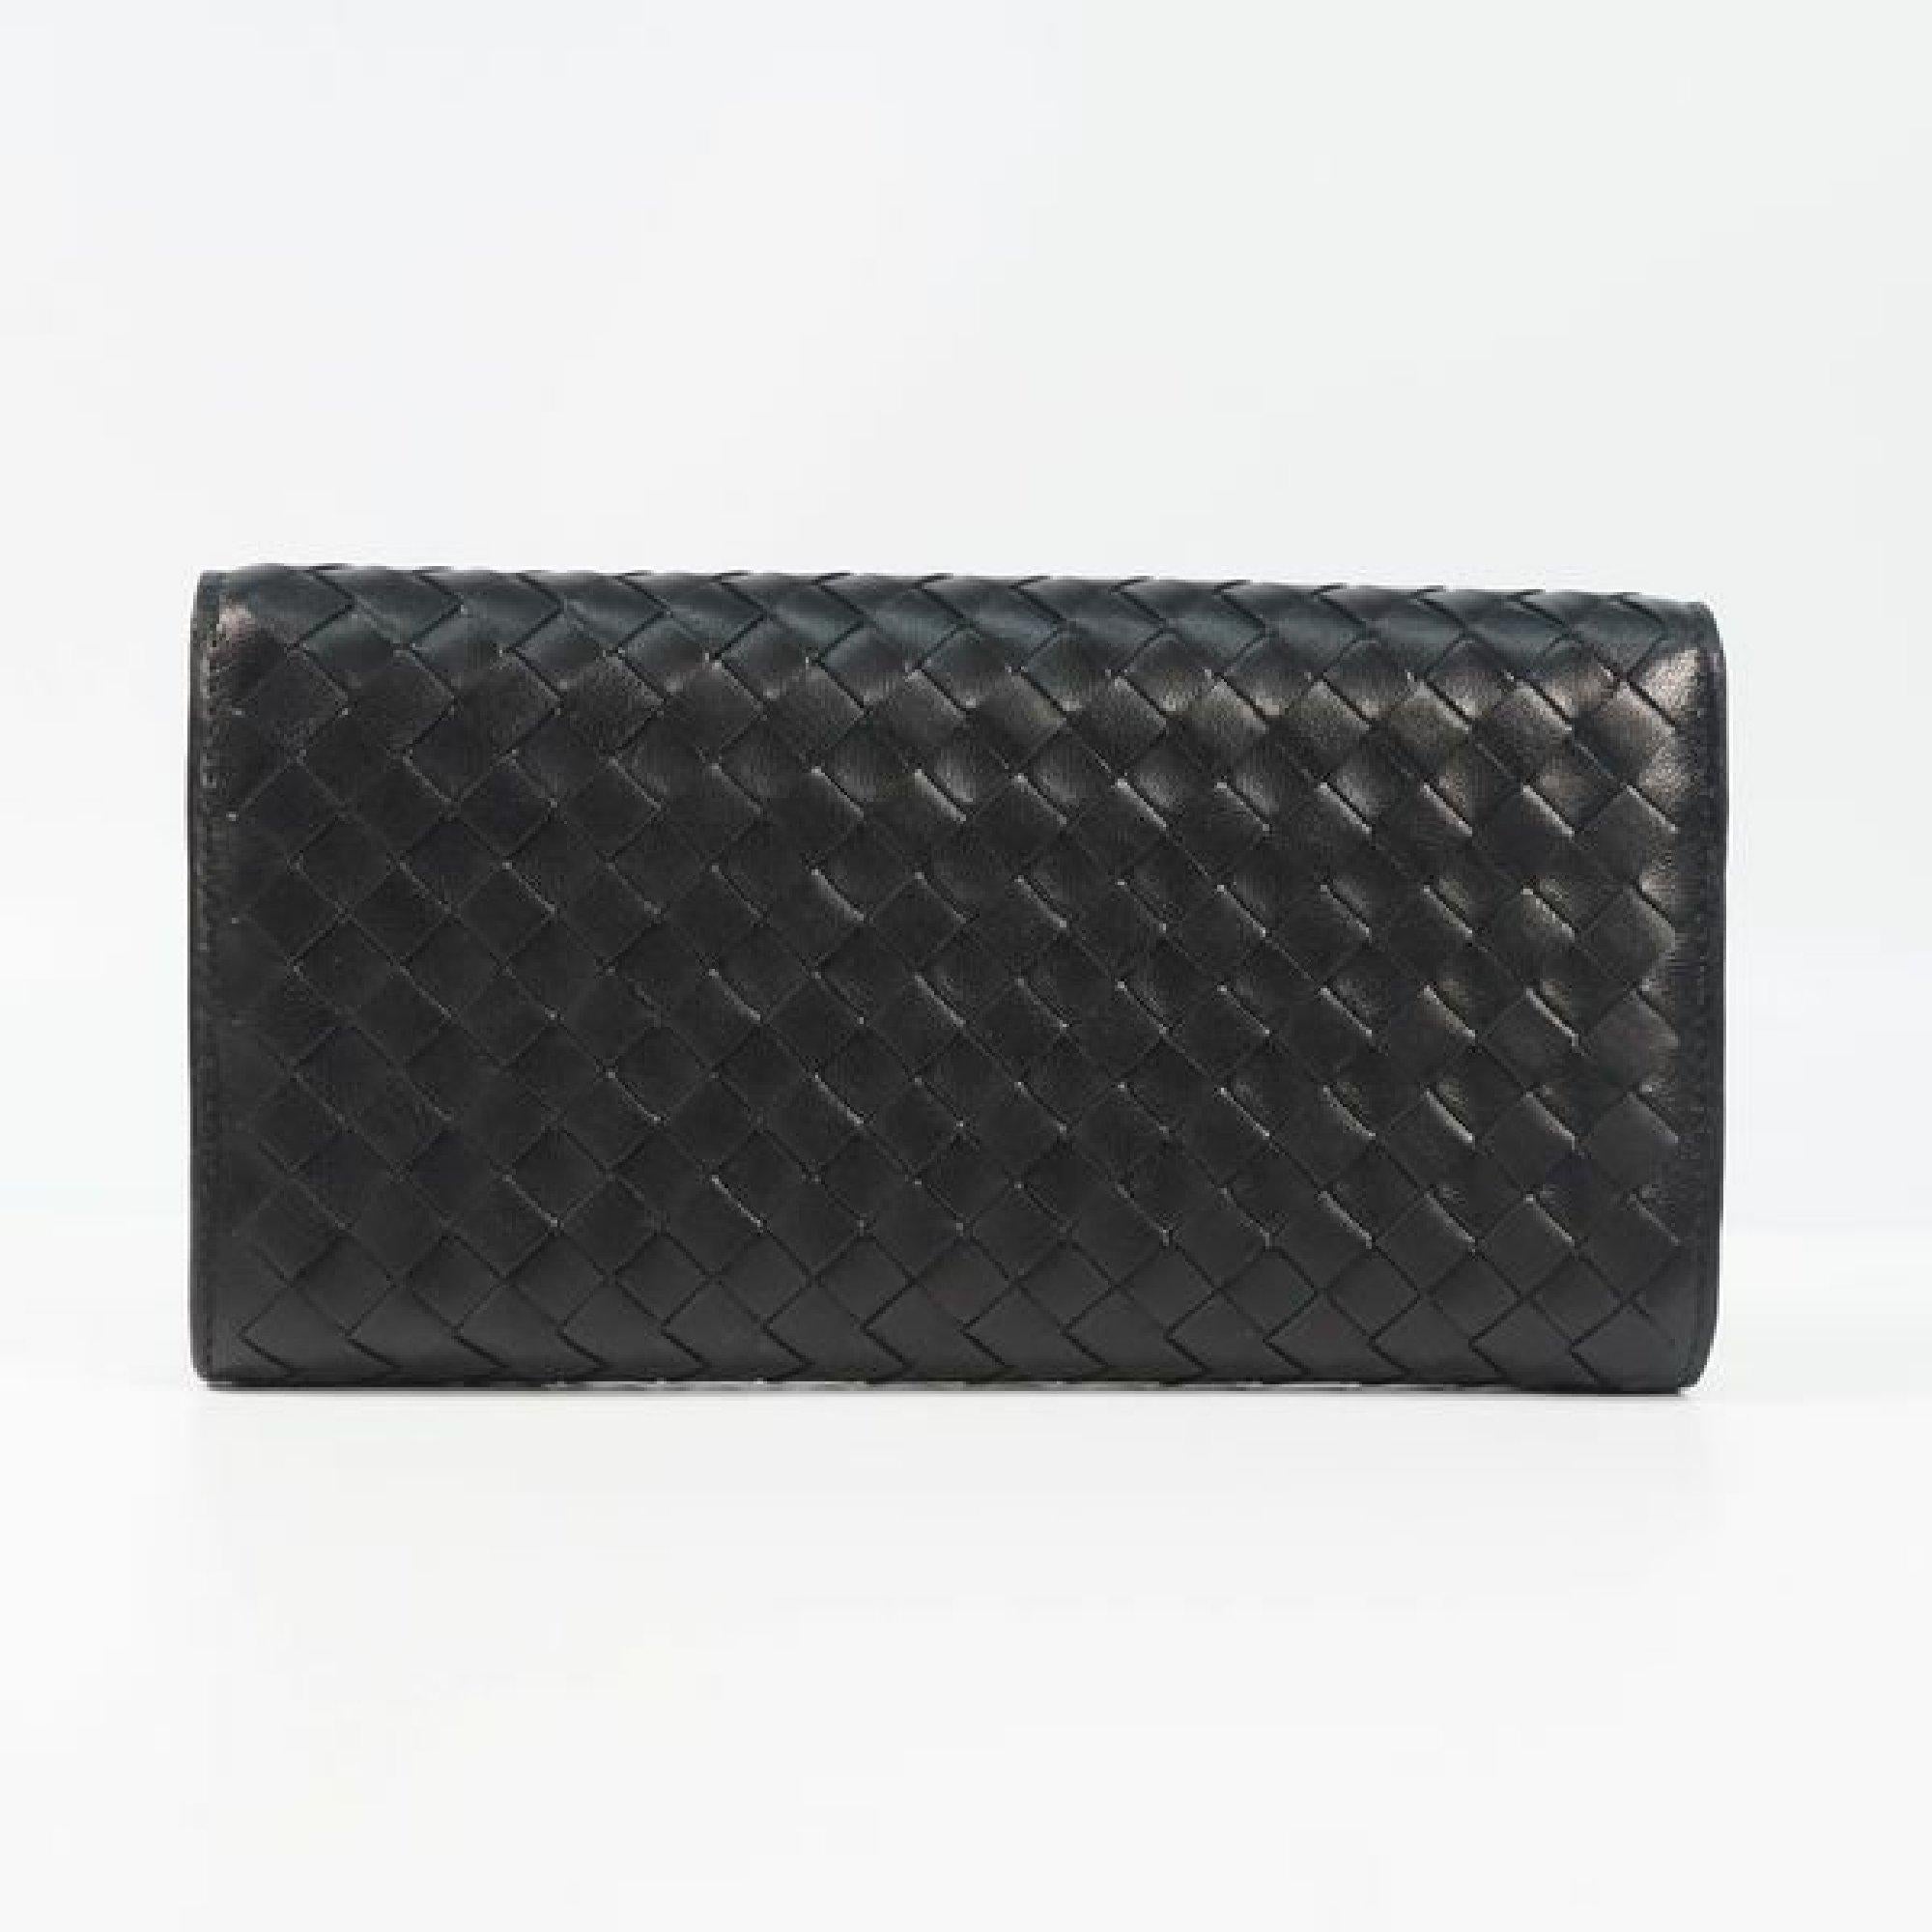 An authentic BOTTEGAVENETA BOTTEGA VENETA Intrecciato continental Wallet Mens long wallet 150. The color is Black. The outside material is made of black Lambskin leather. The pattern is Intrecciato continental Wallet. This item is Contemporary. The